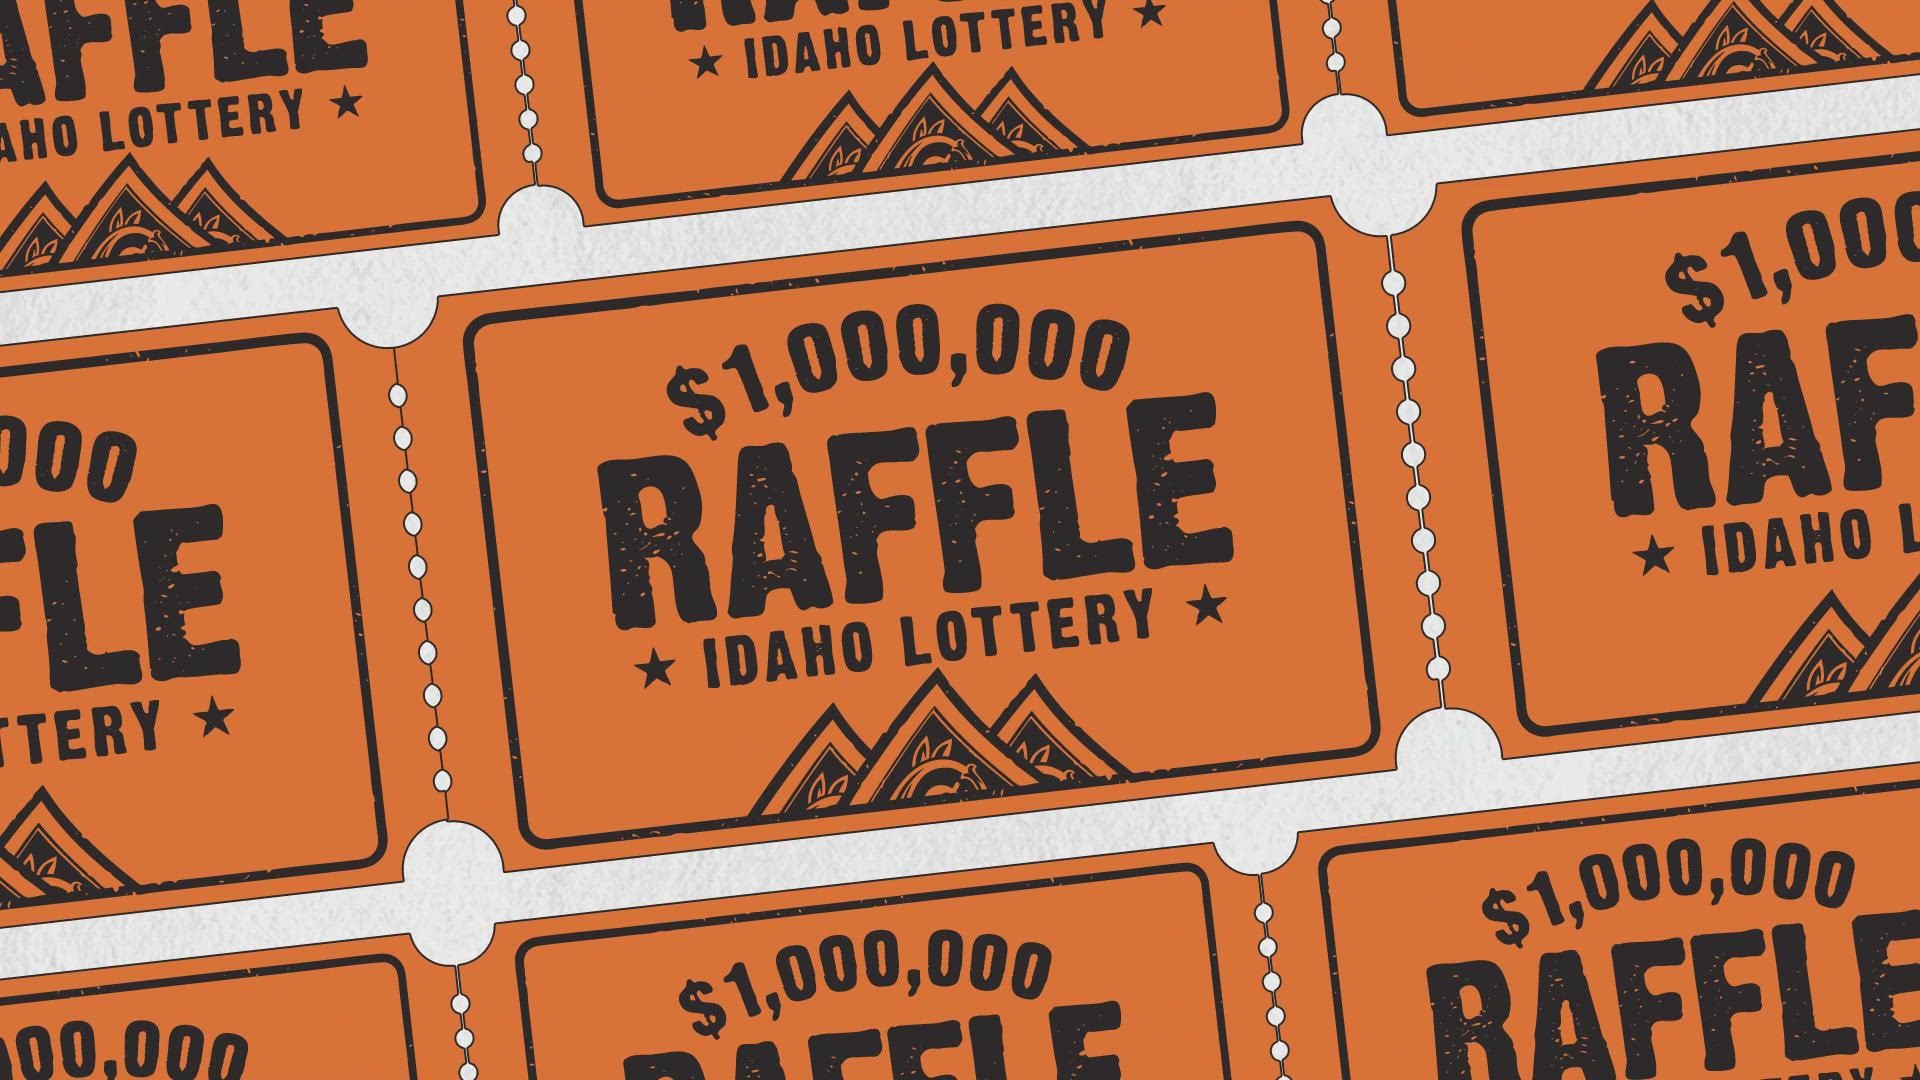 Someone in the Gem State has a $10,000 winning Idaho $1,000,000 Raffle ticket that was sold last fall in Nampa.